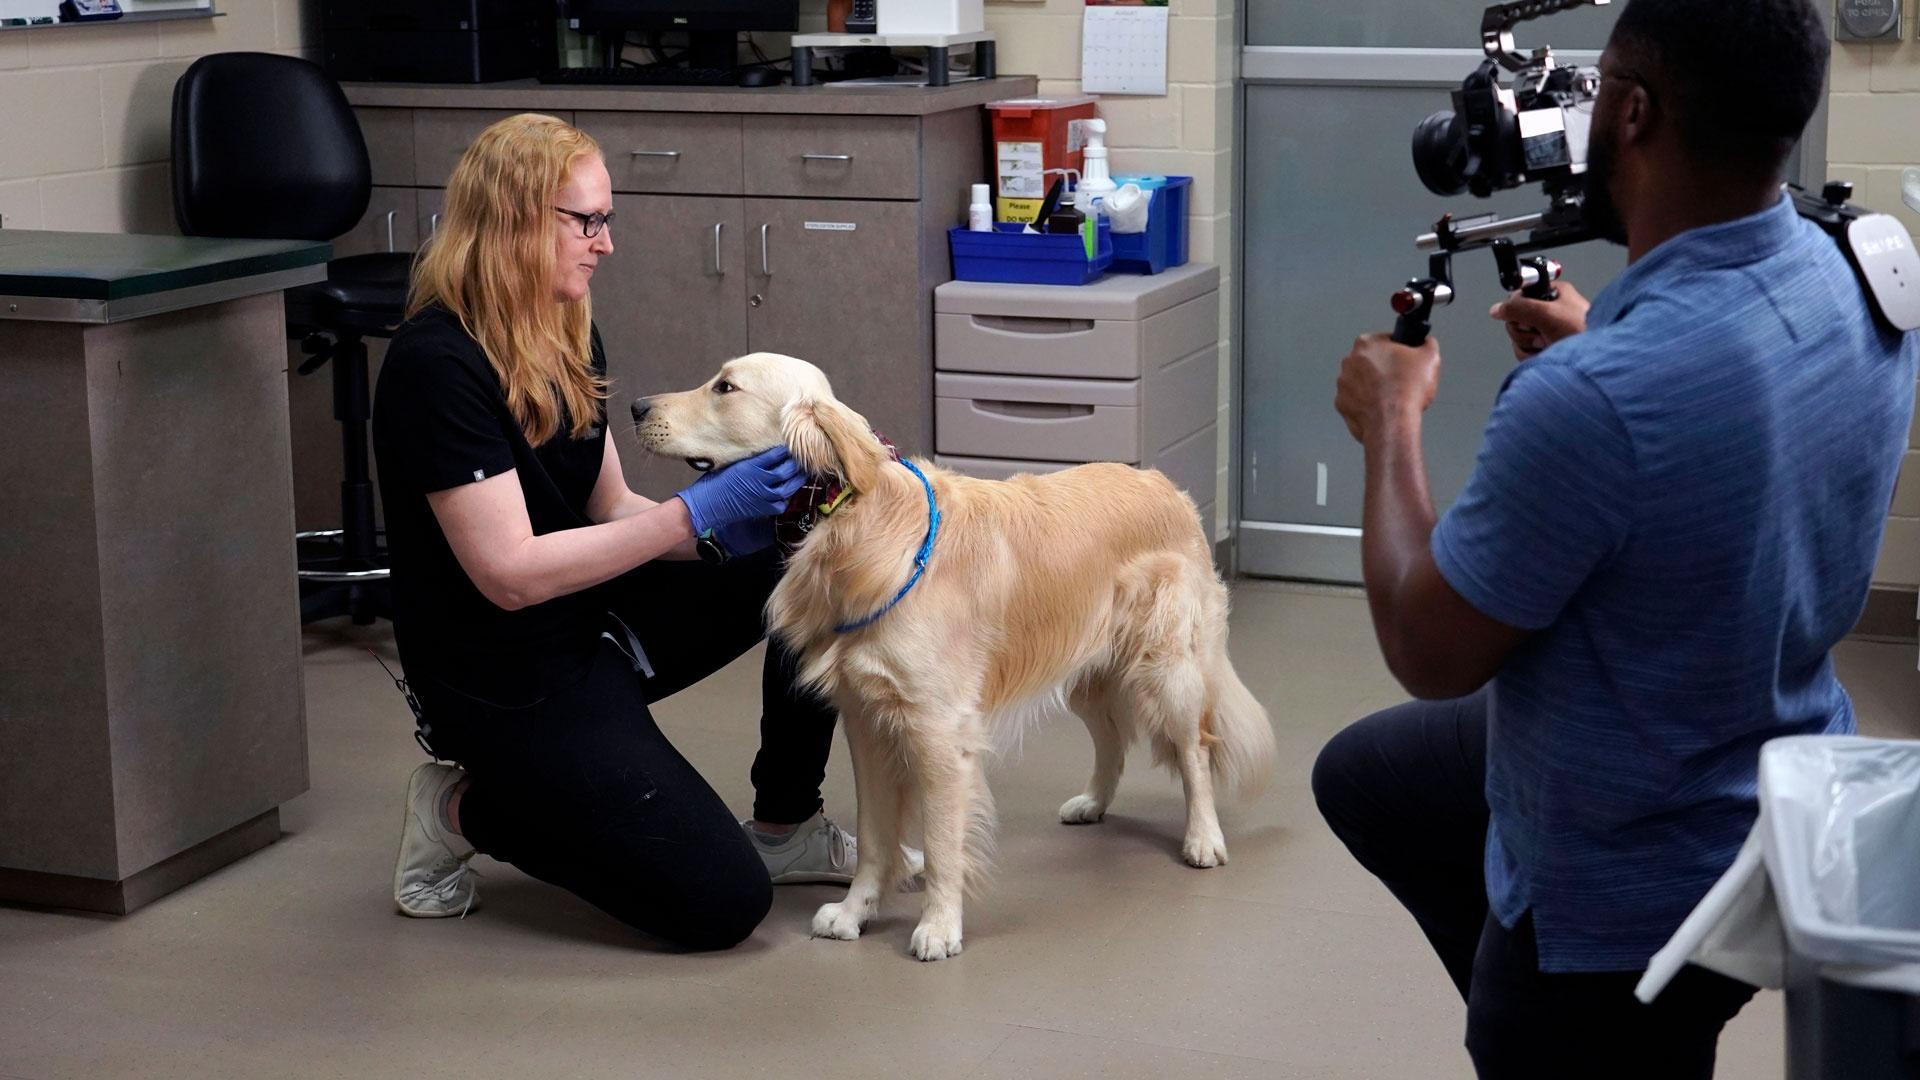 Veterinarian Dr. Kate Barnes examines Dale the dog, as featured on Season 2 of "Texas A&M Today."